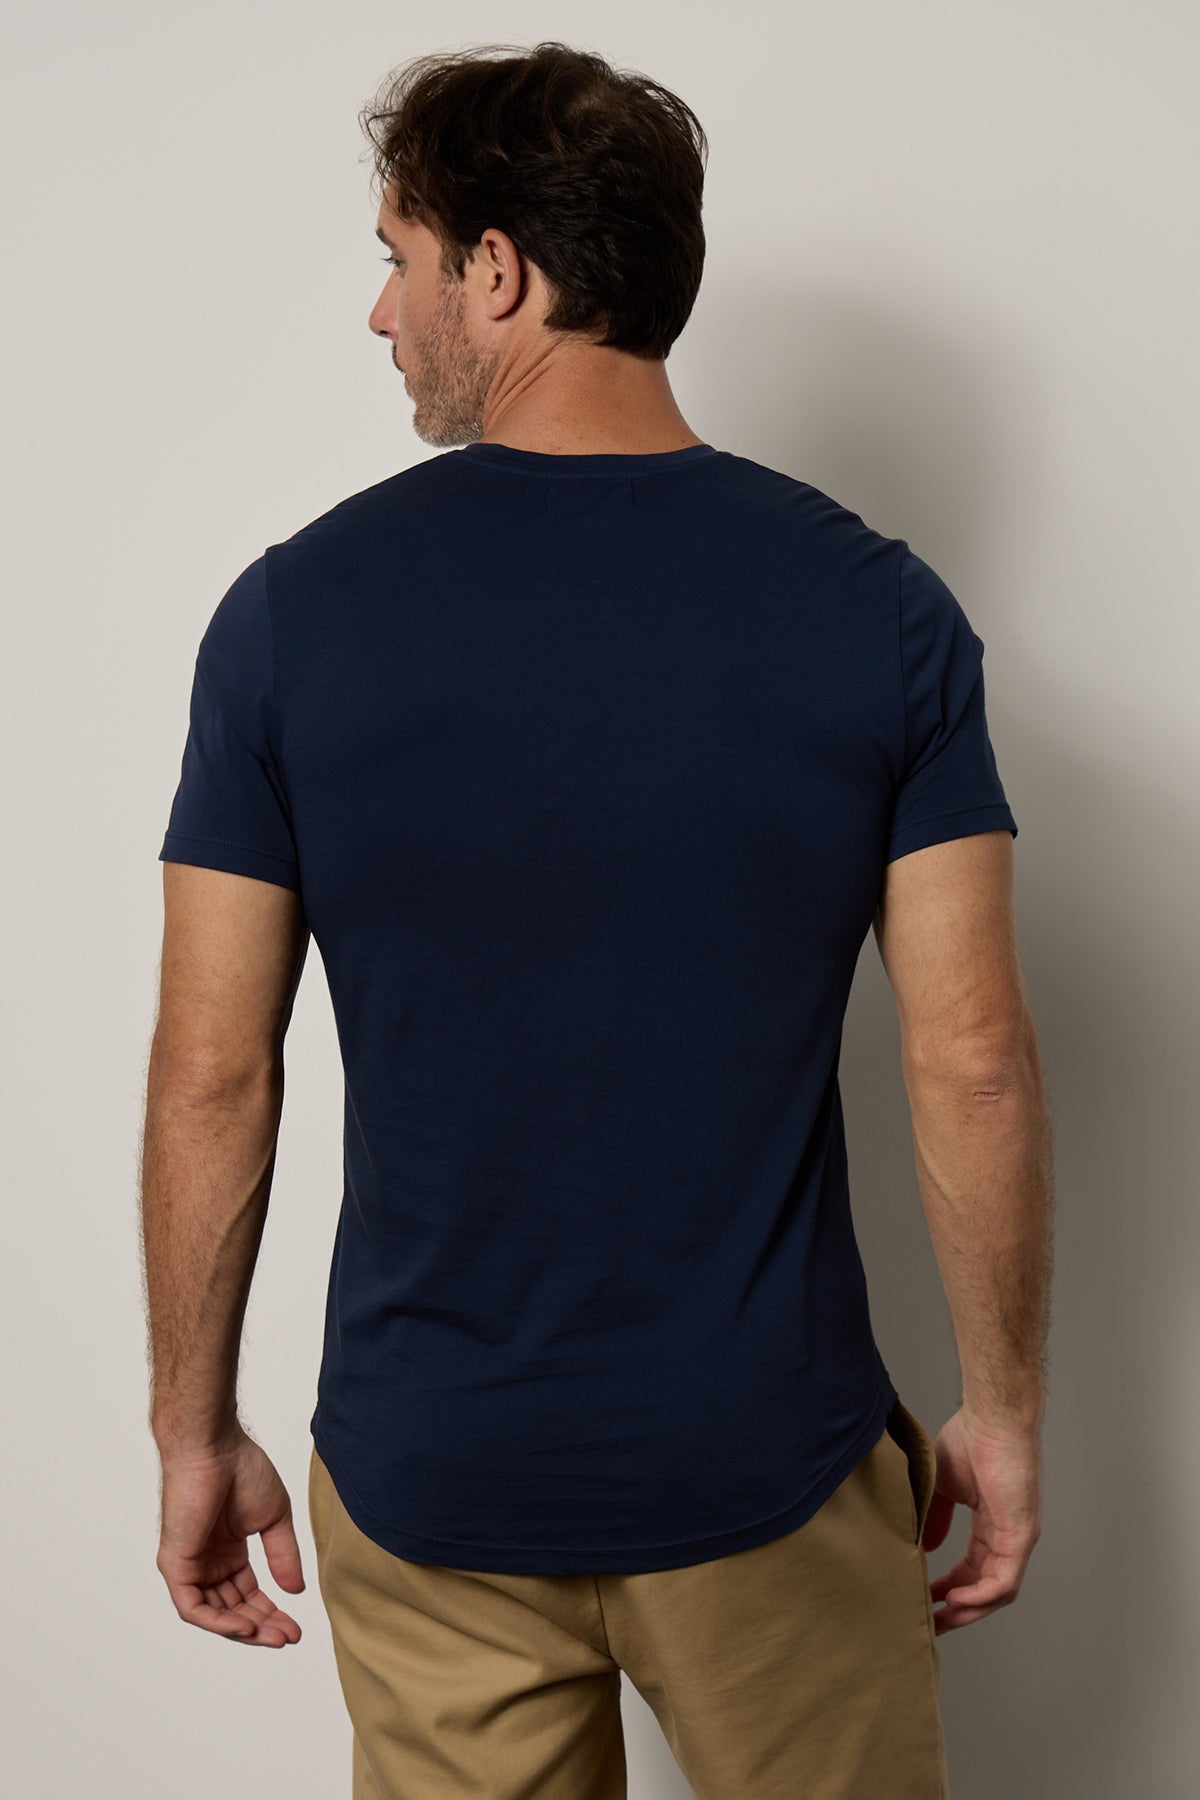 Fulton Short Sleeve Henley in midnight with Aiden pant in khaki back-26079171739841